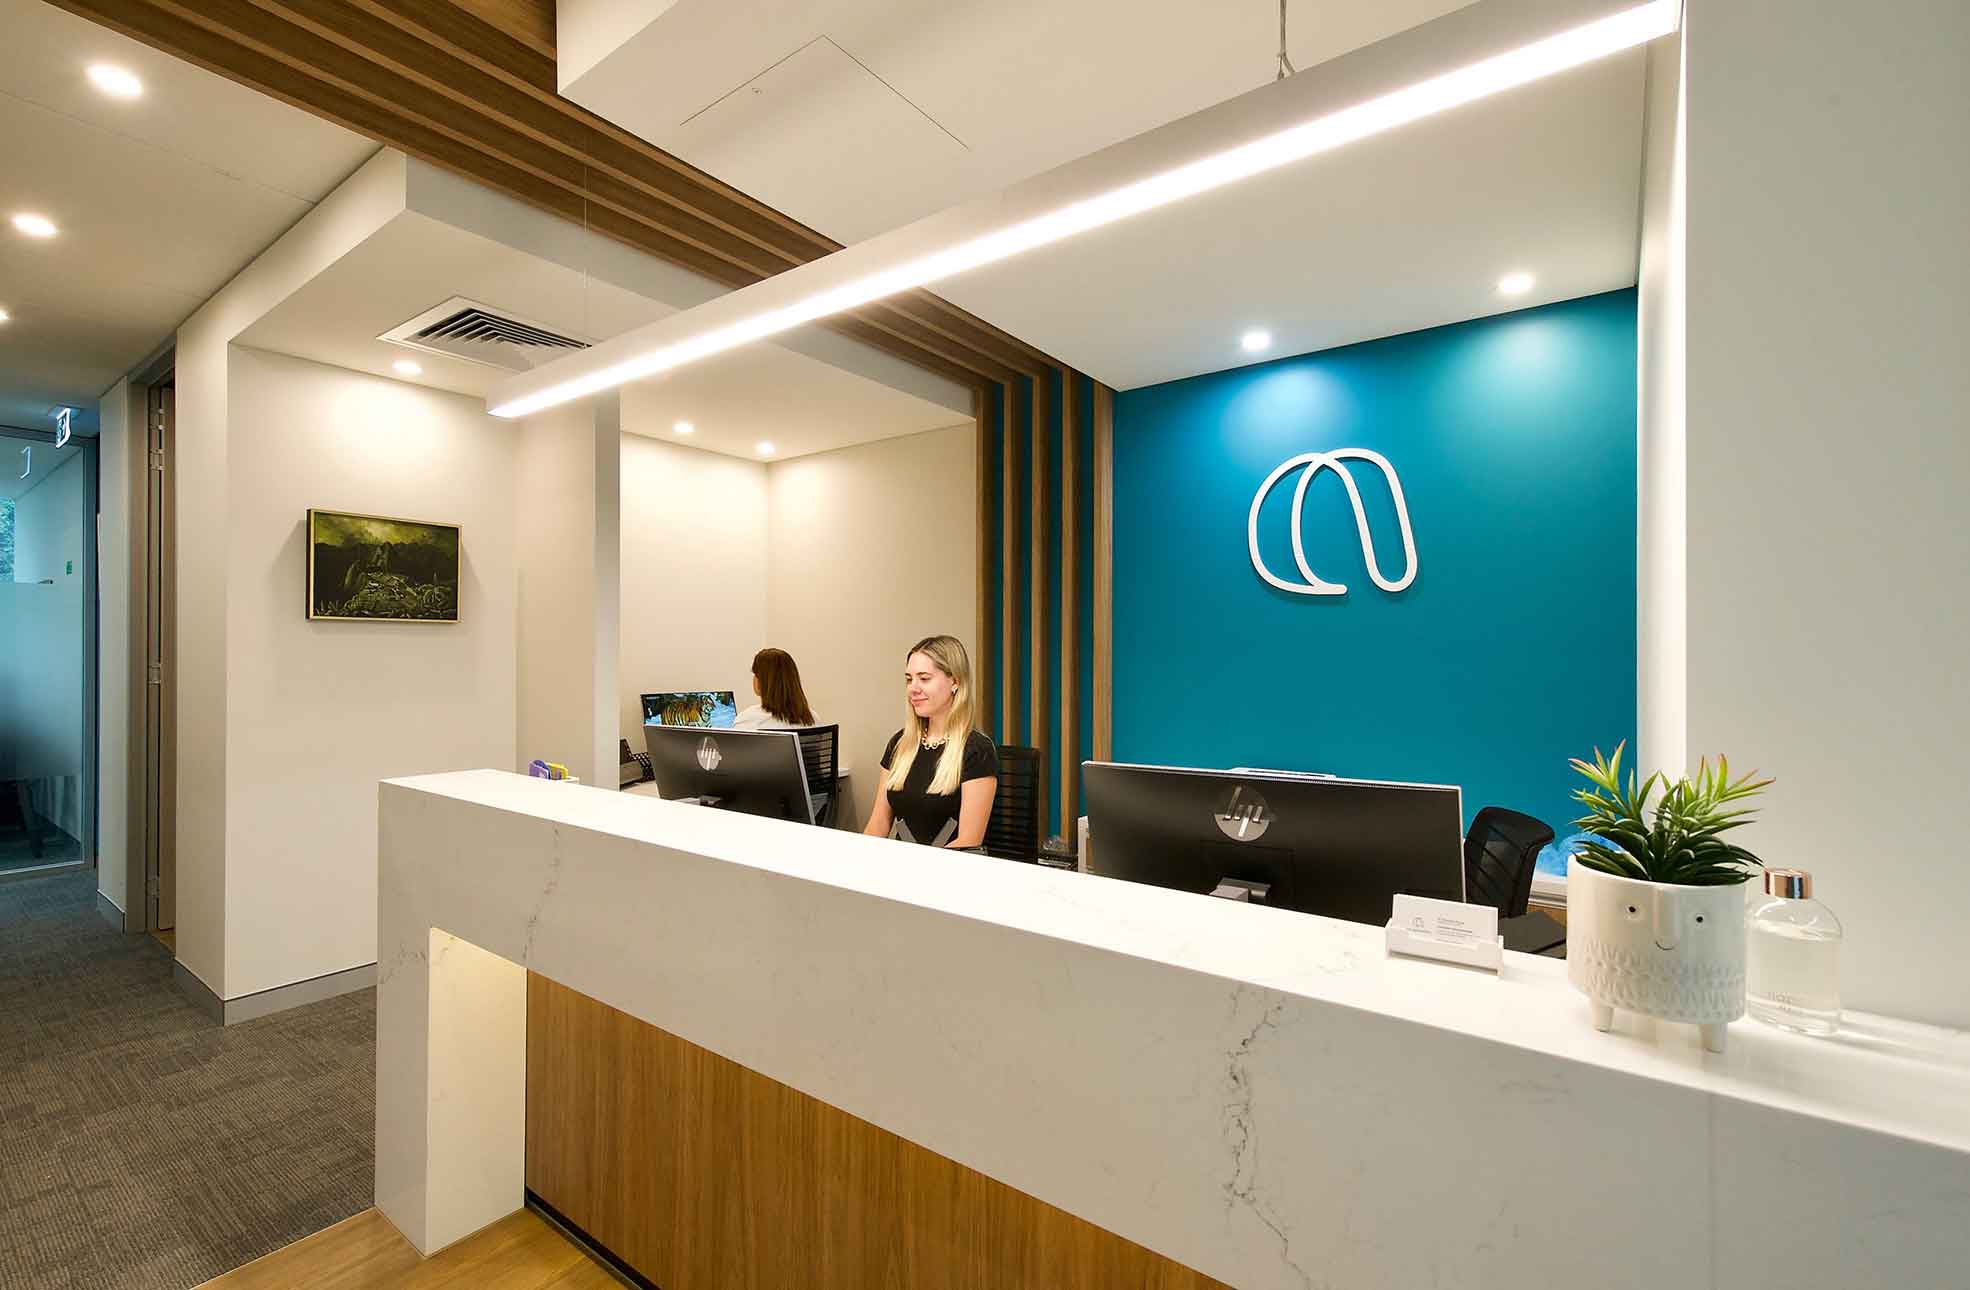 Receptionists behind reception desk in new healthcare fitout 